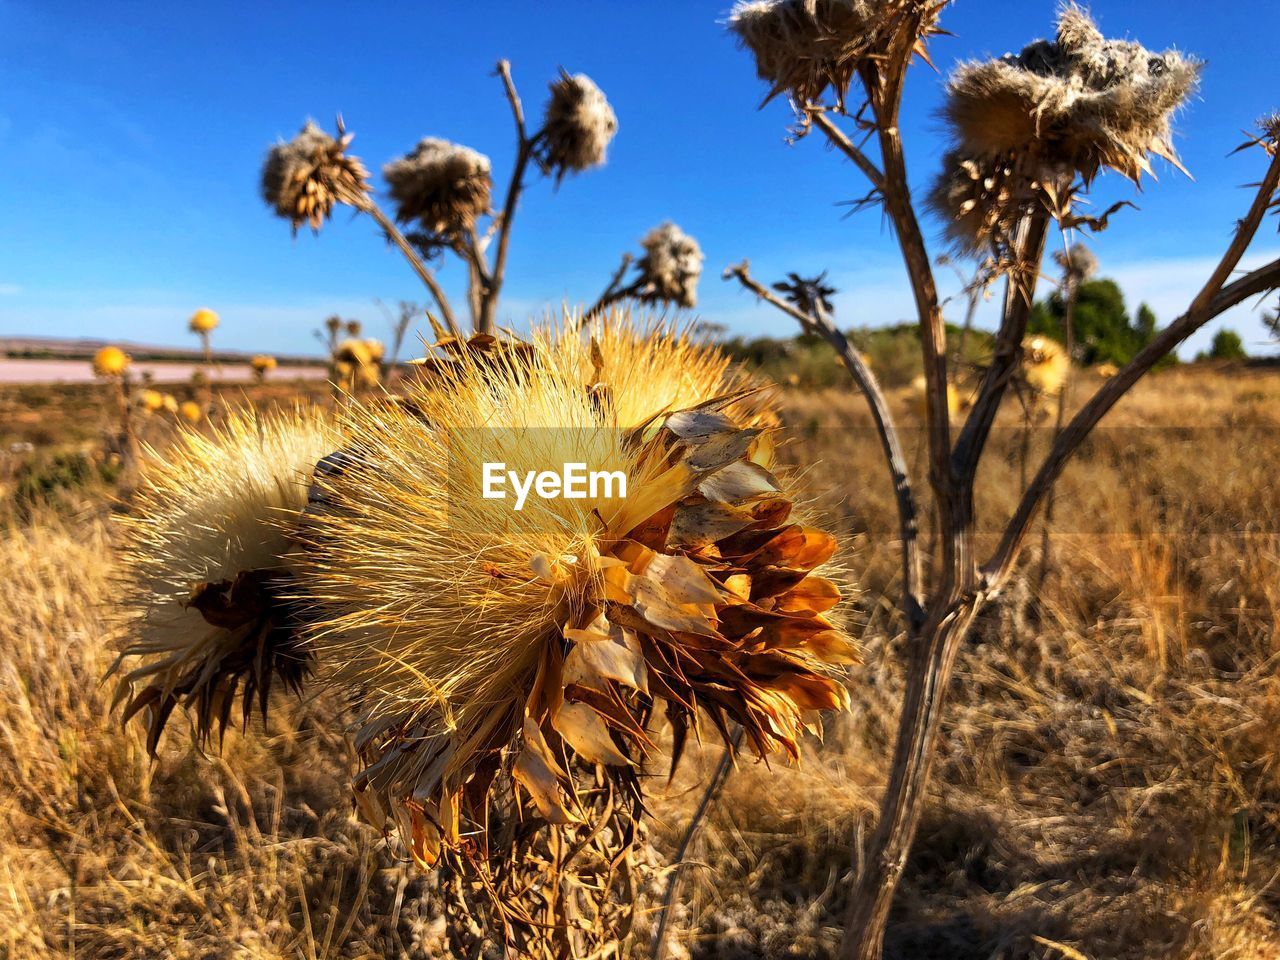 CLOSE-UP OF DRY THISTLE FLOWER ON FIELD